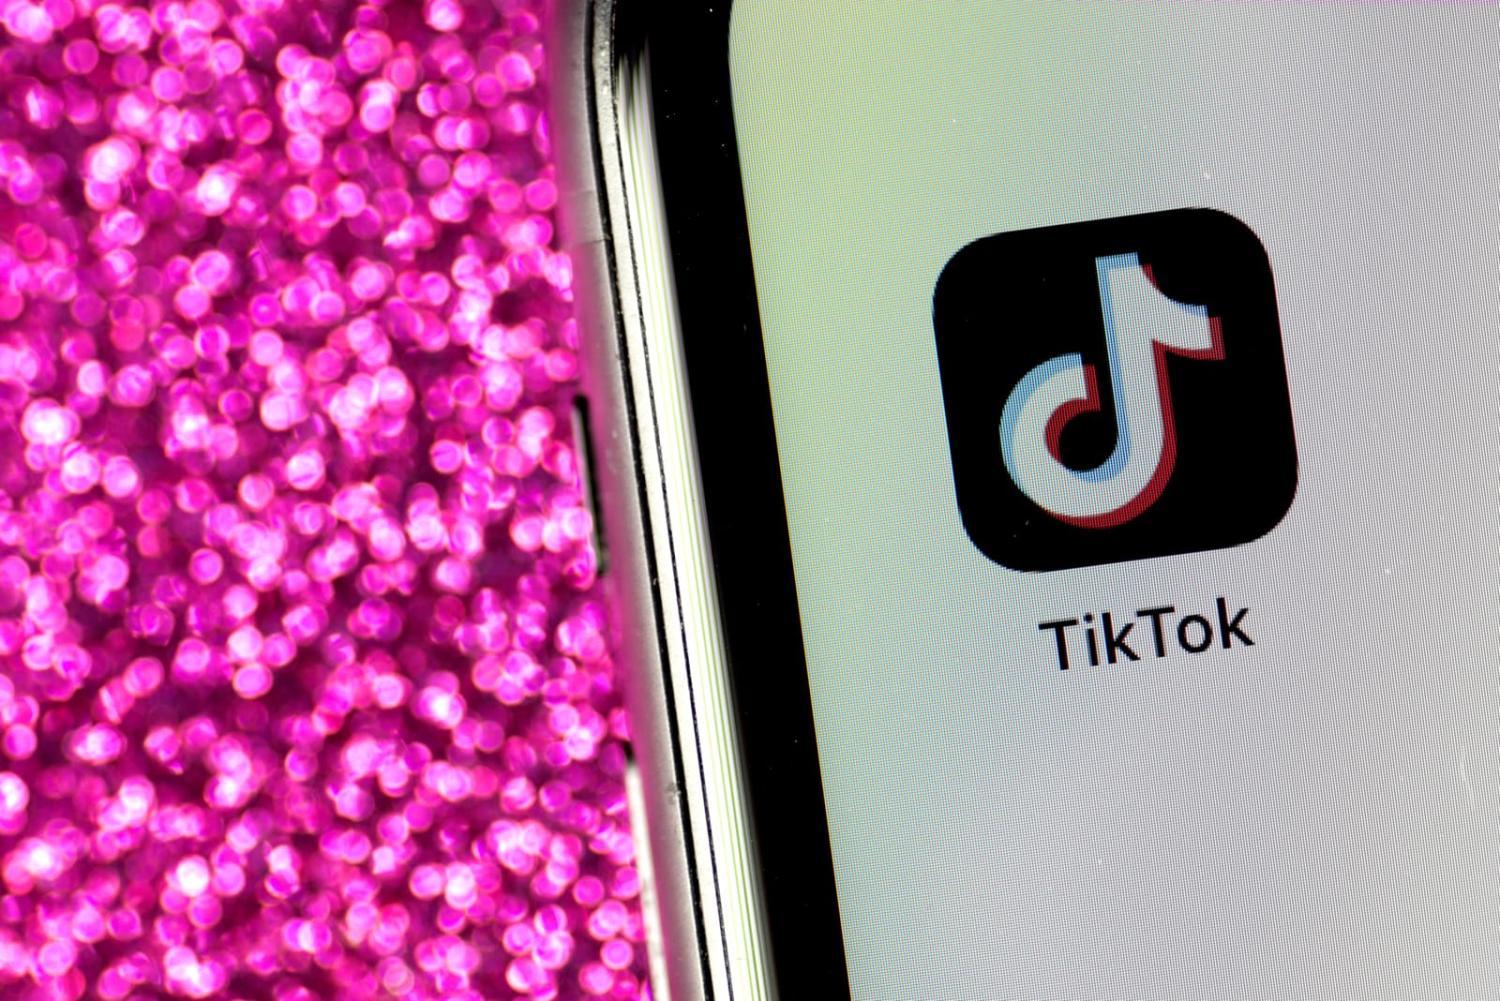 Despite denials, a TikTok exec admitted in 2022 that Australian user data could be accessed in China and its privacy policy was later amended to reflect this reality (Brent Lewin/Bloomberg via Getty Images)